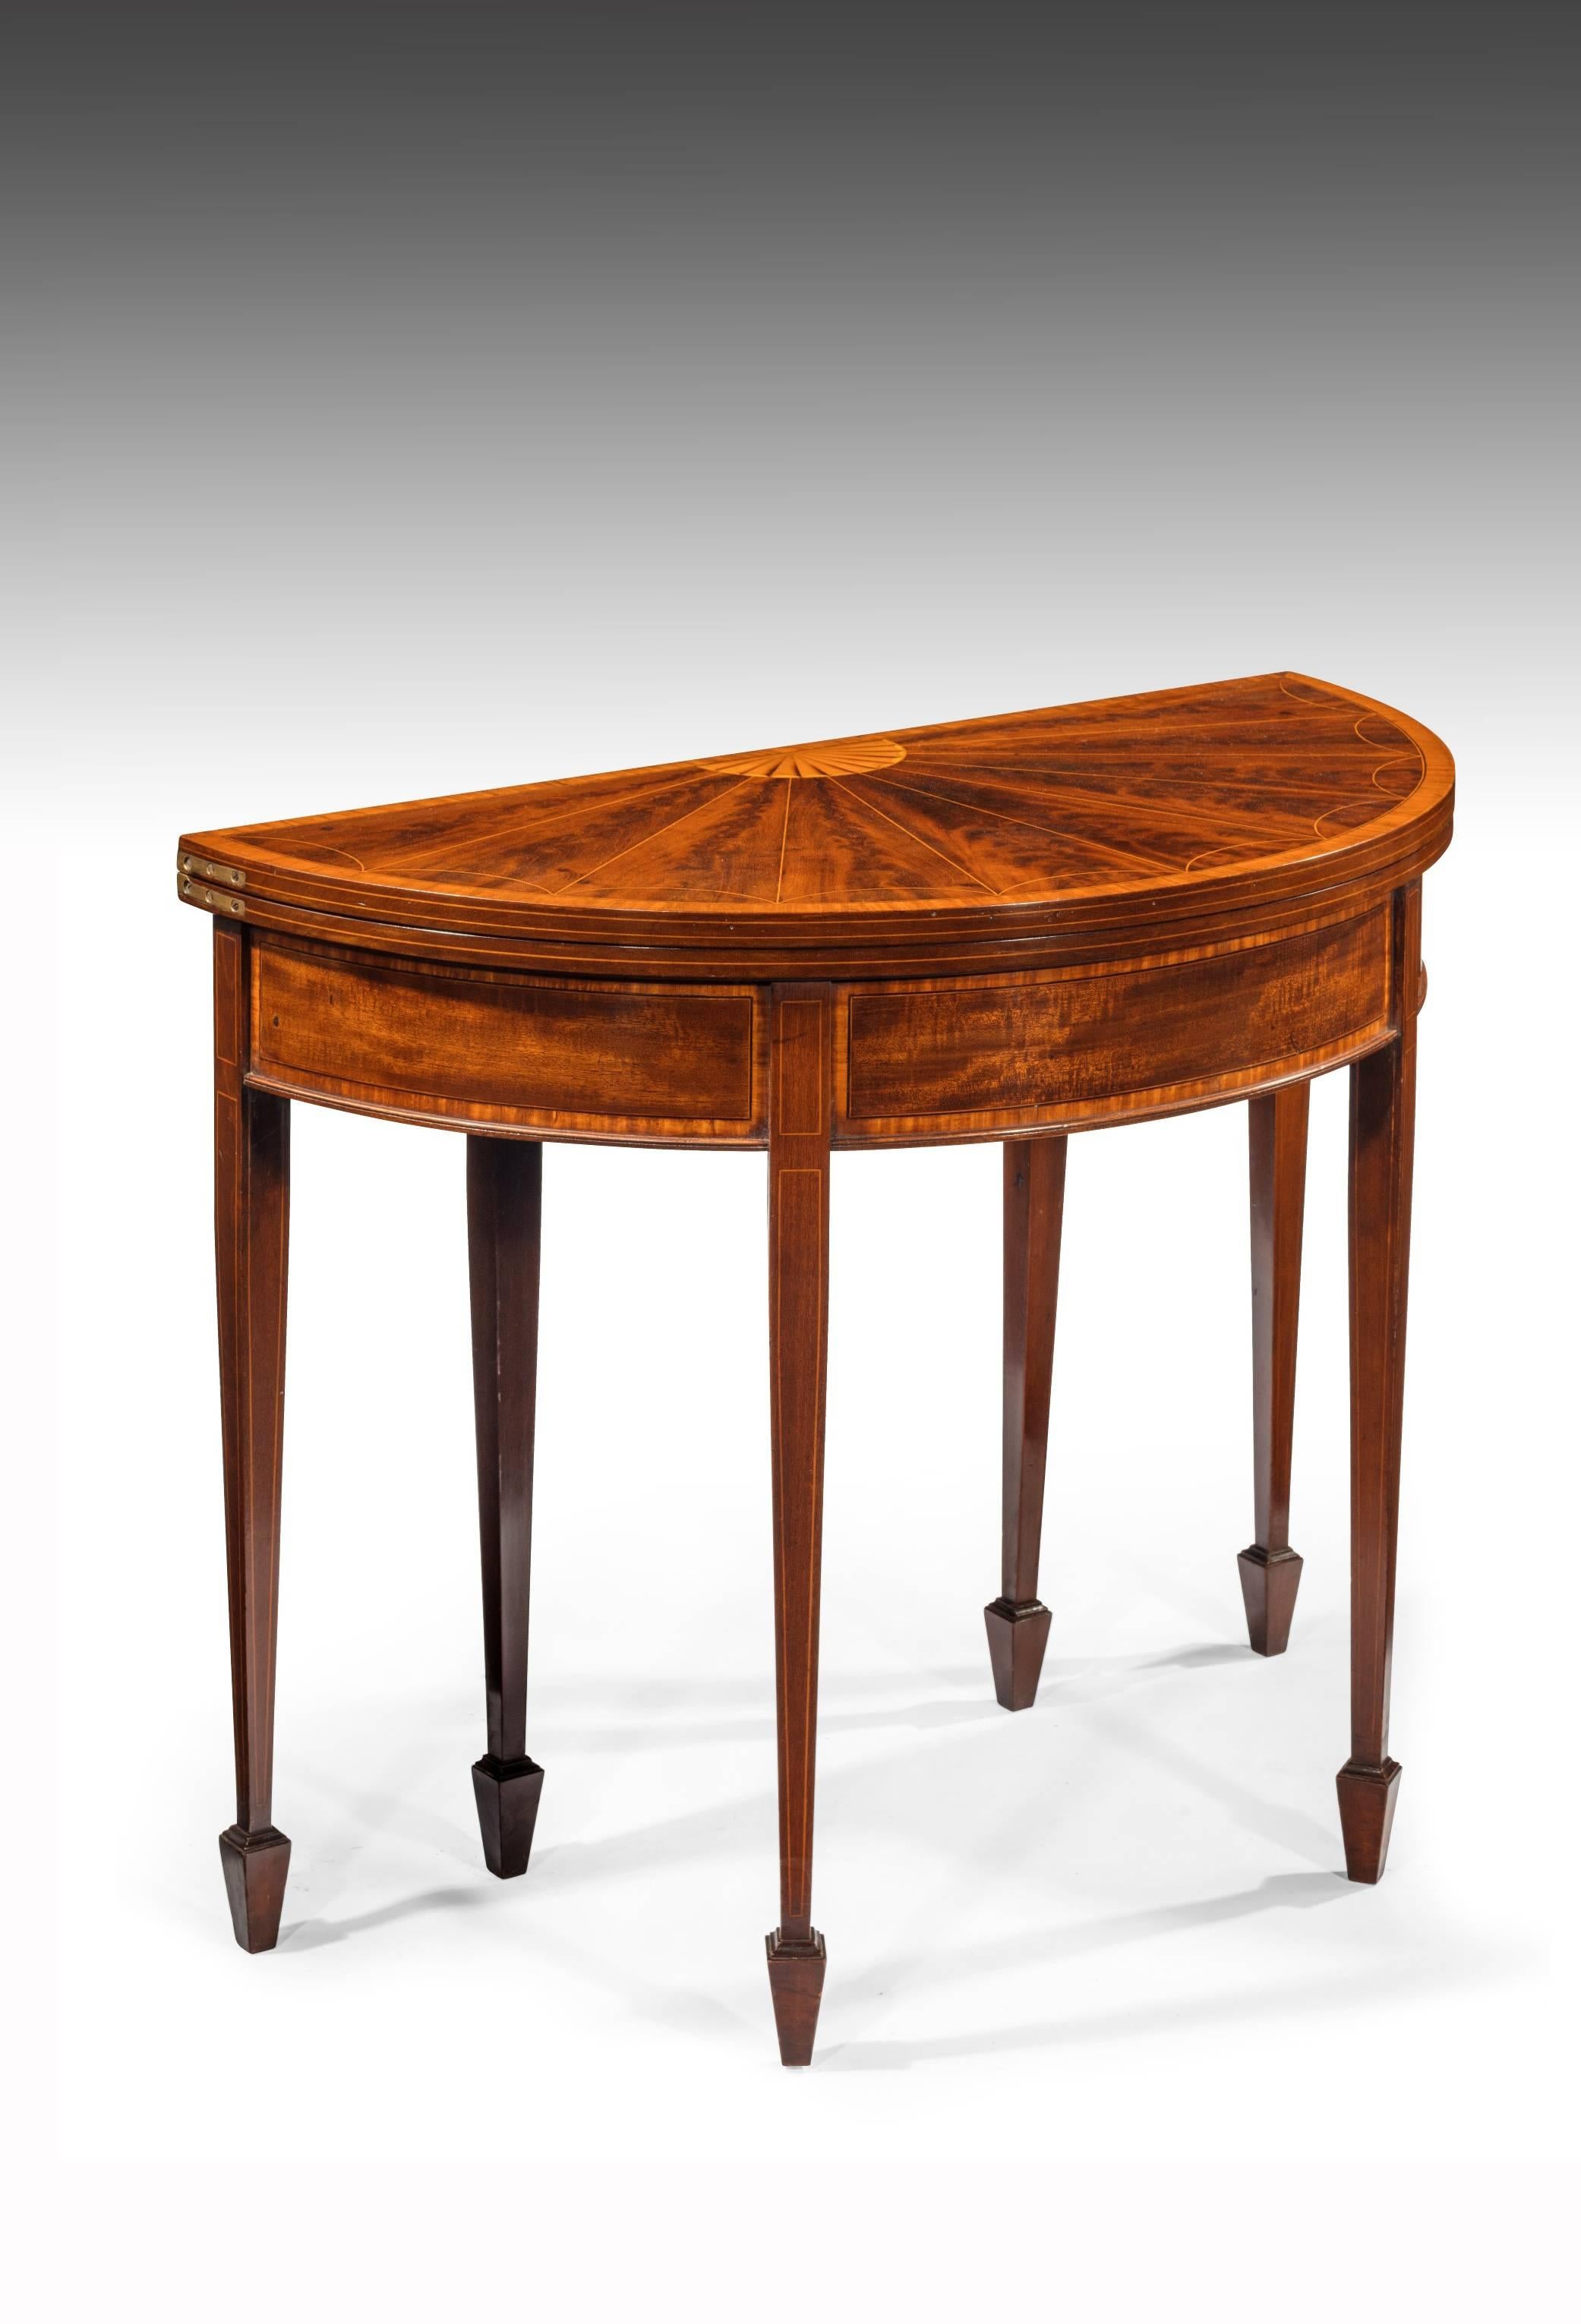 A very fine 19th century mahogany six legged demilune card table with sunburst inlaid top. 
This extremely good quality fold over card table of demilune form dating to the late 19th century, circa 1880 has a beautifully segmented flame veneered and